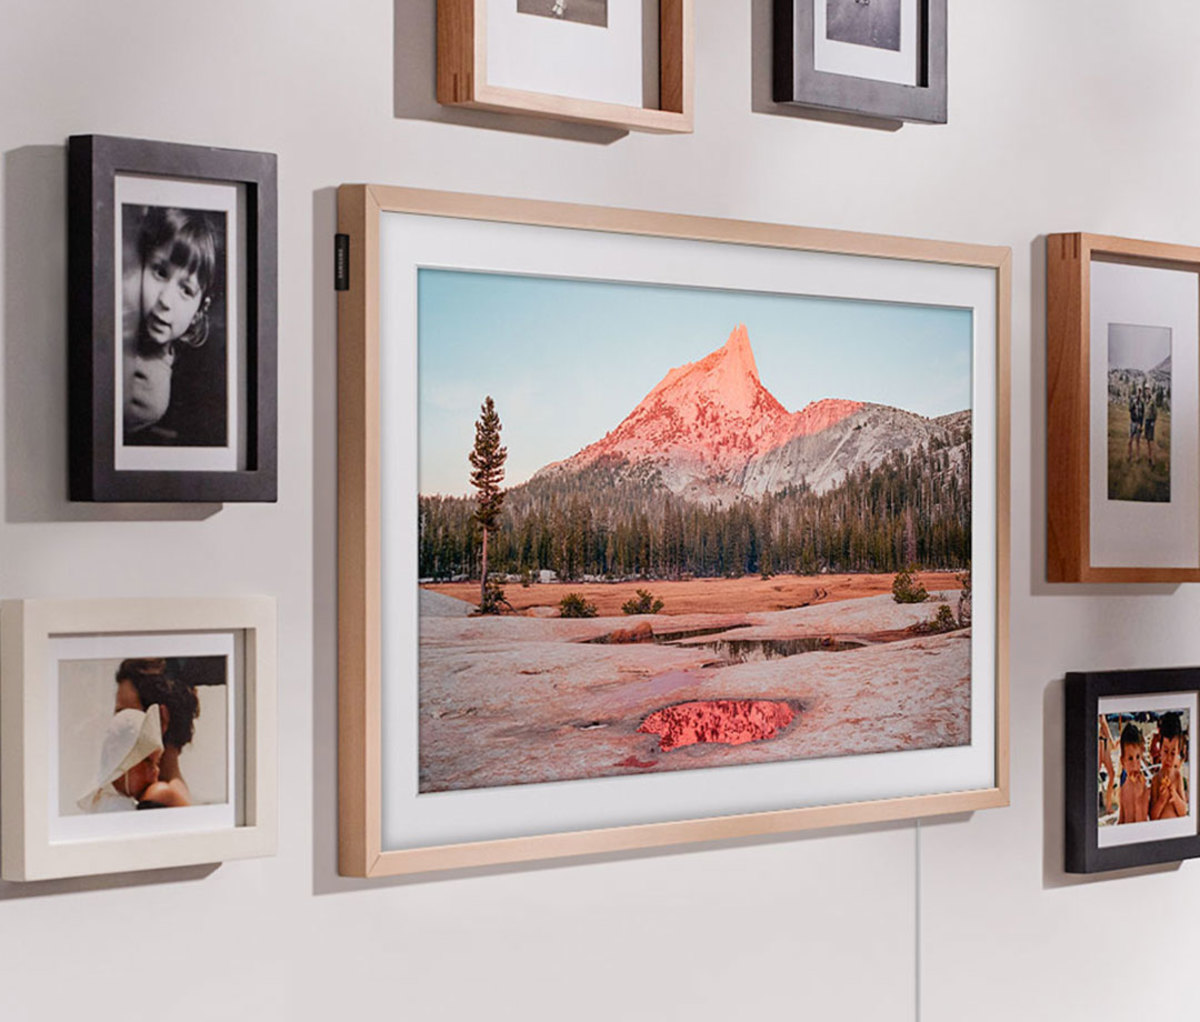 Gallery wall of images in varying frame sizes